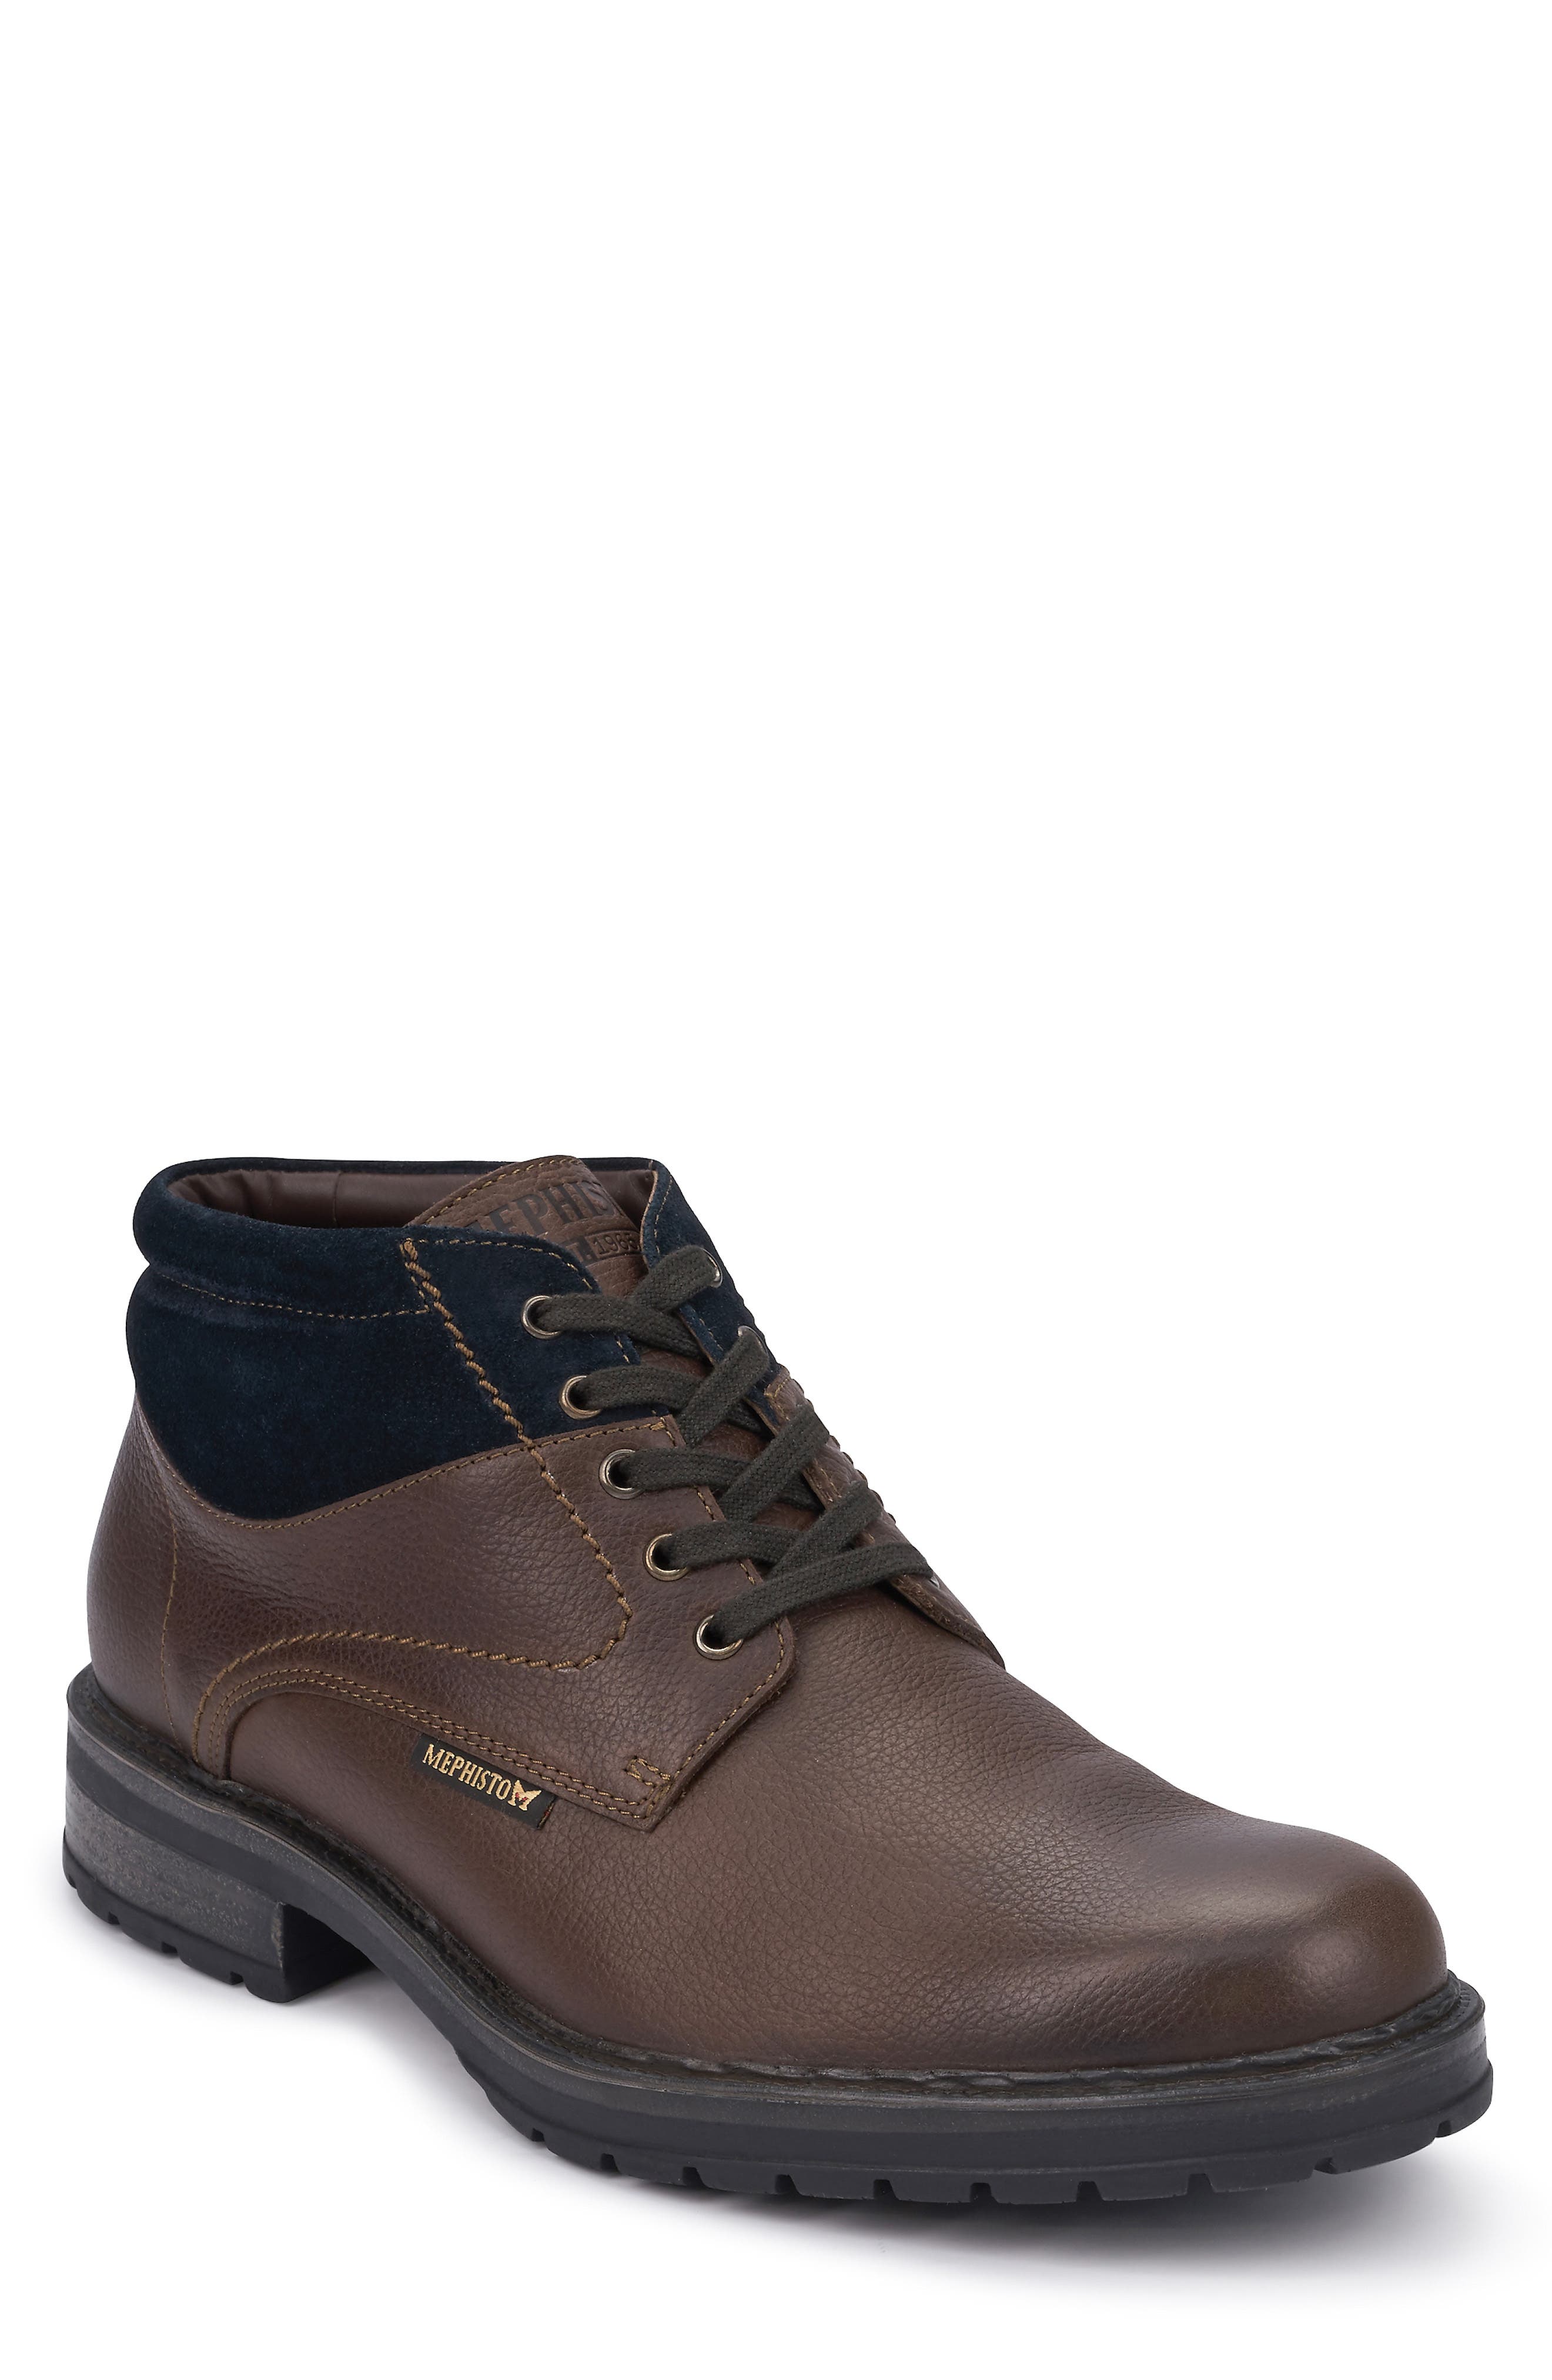 mephisto men's shoes clearance